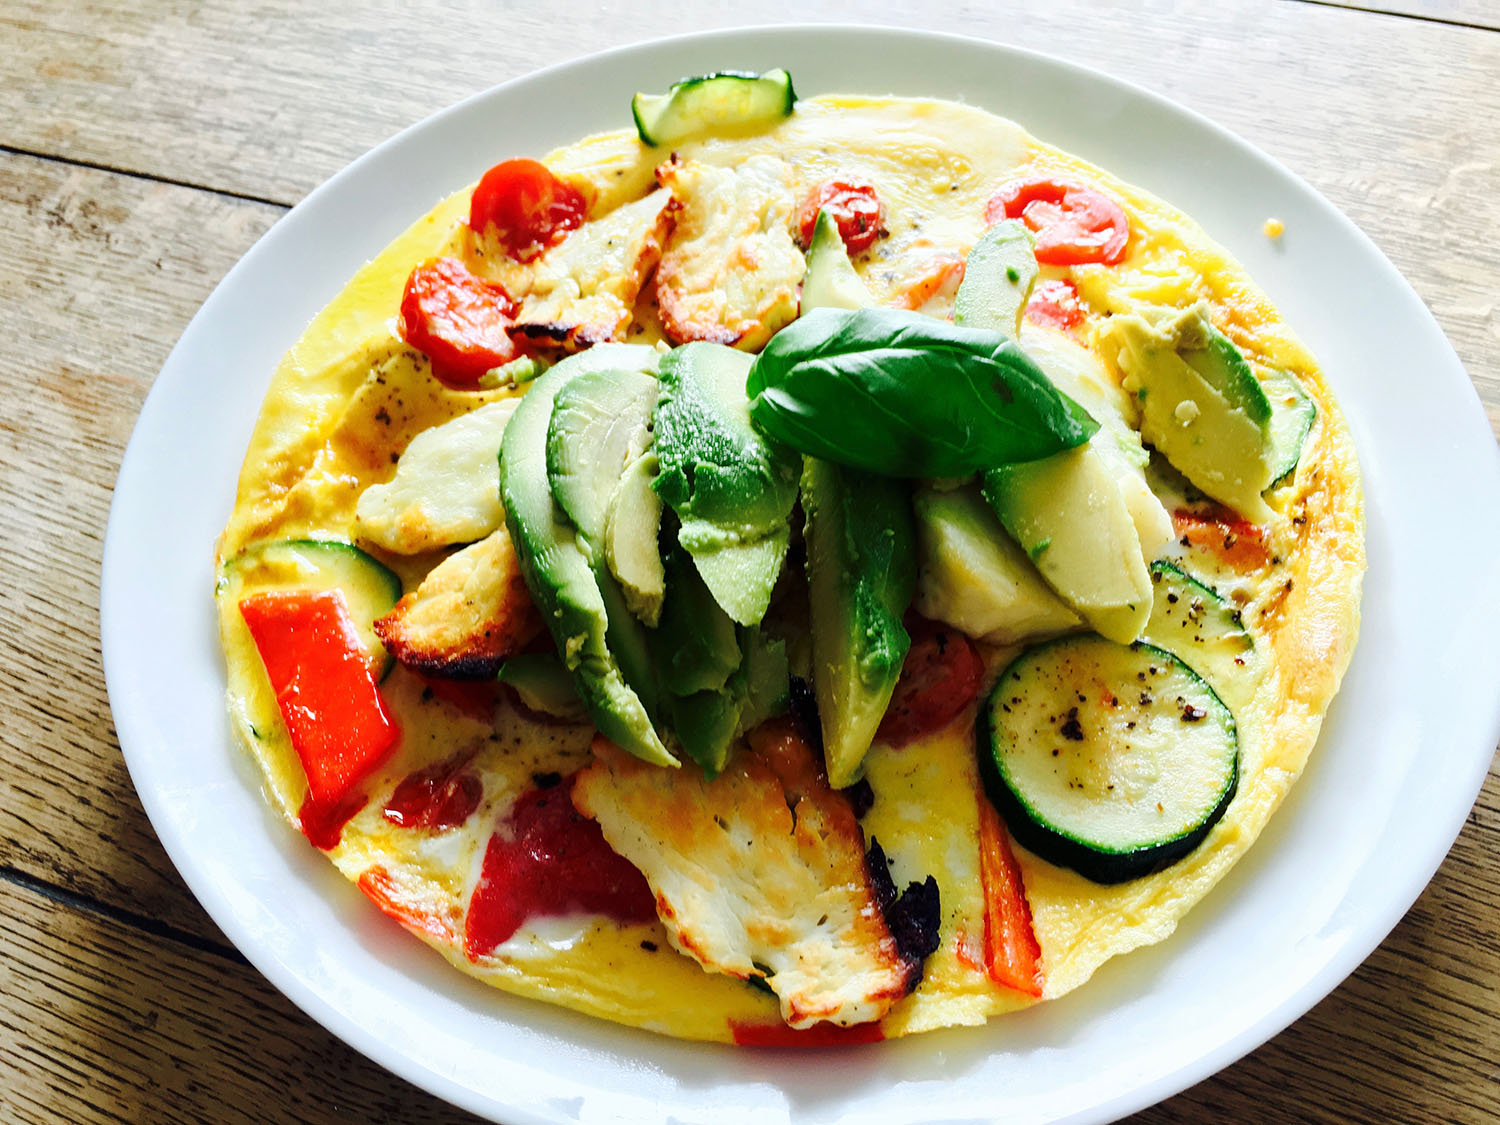 Recipe of the week - The Omelette